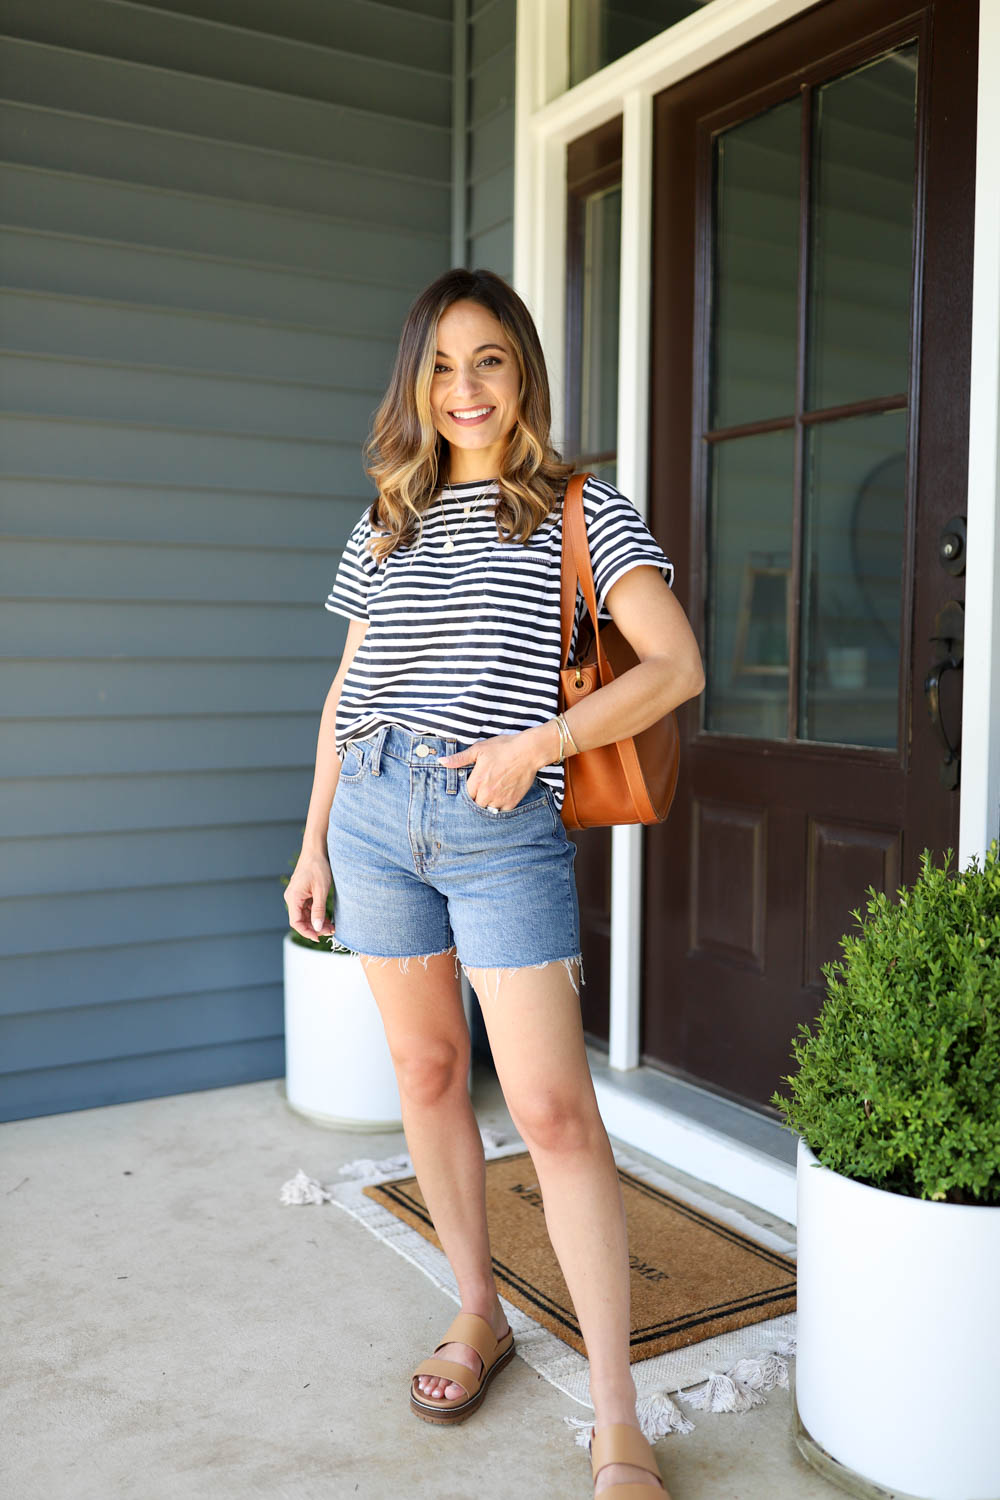 Summer Outfit Captions And Quotes For Instagram